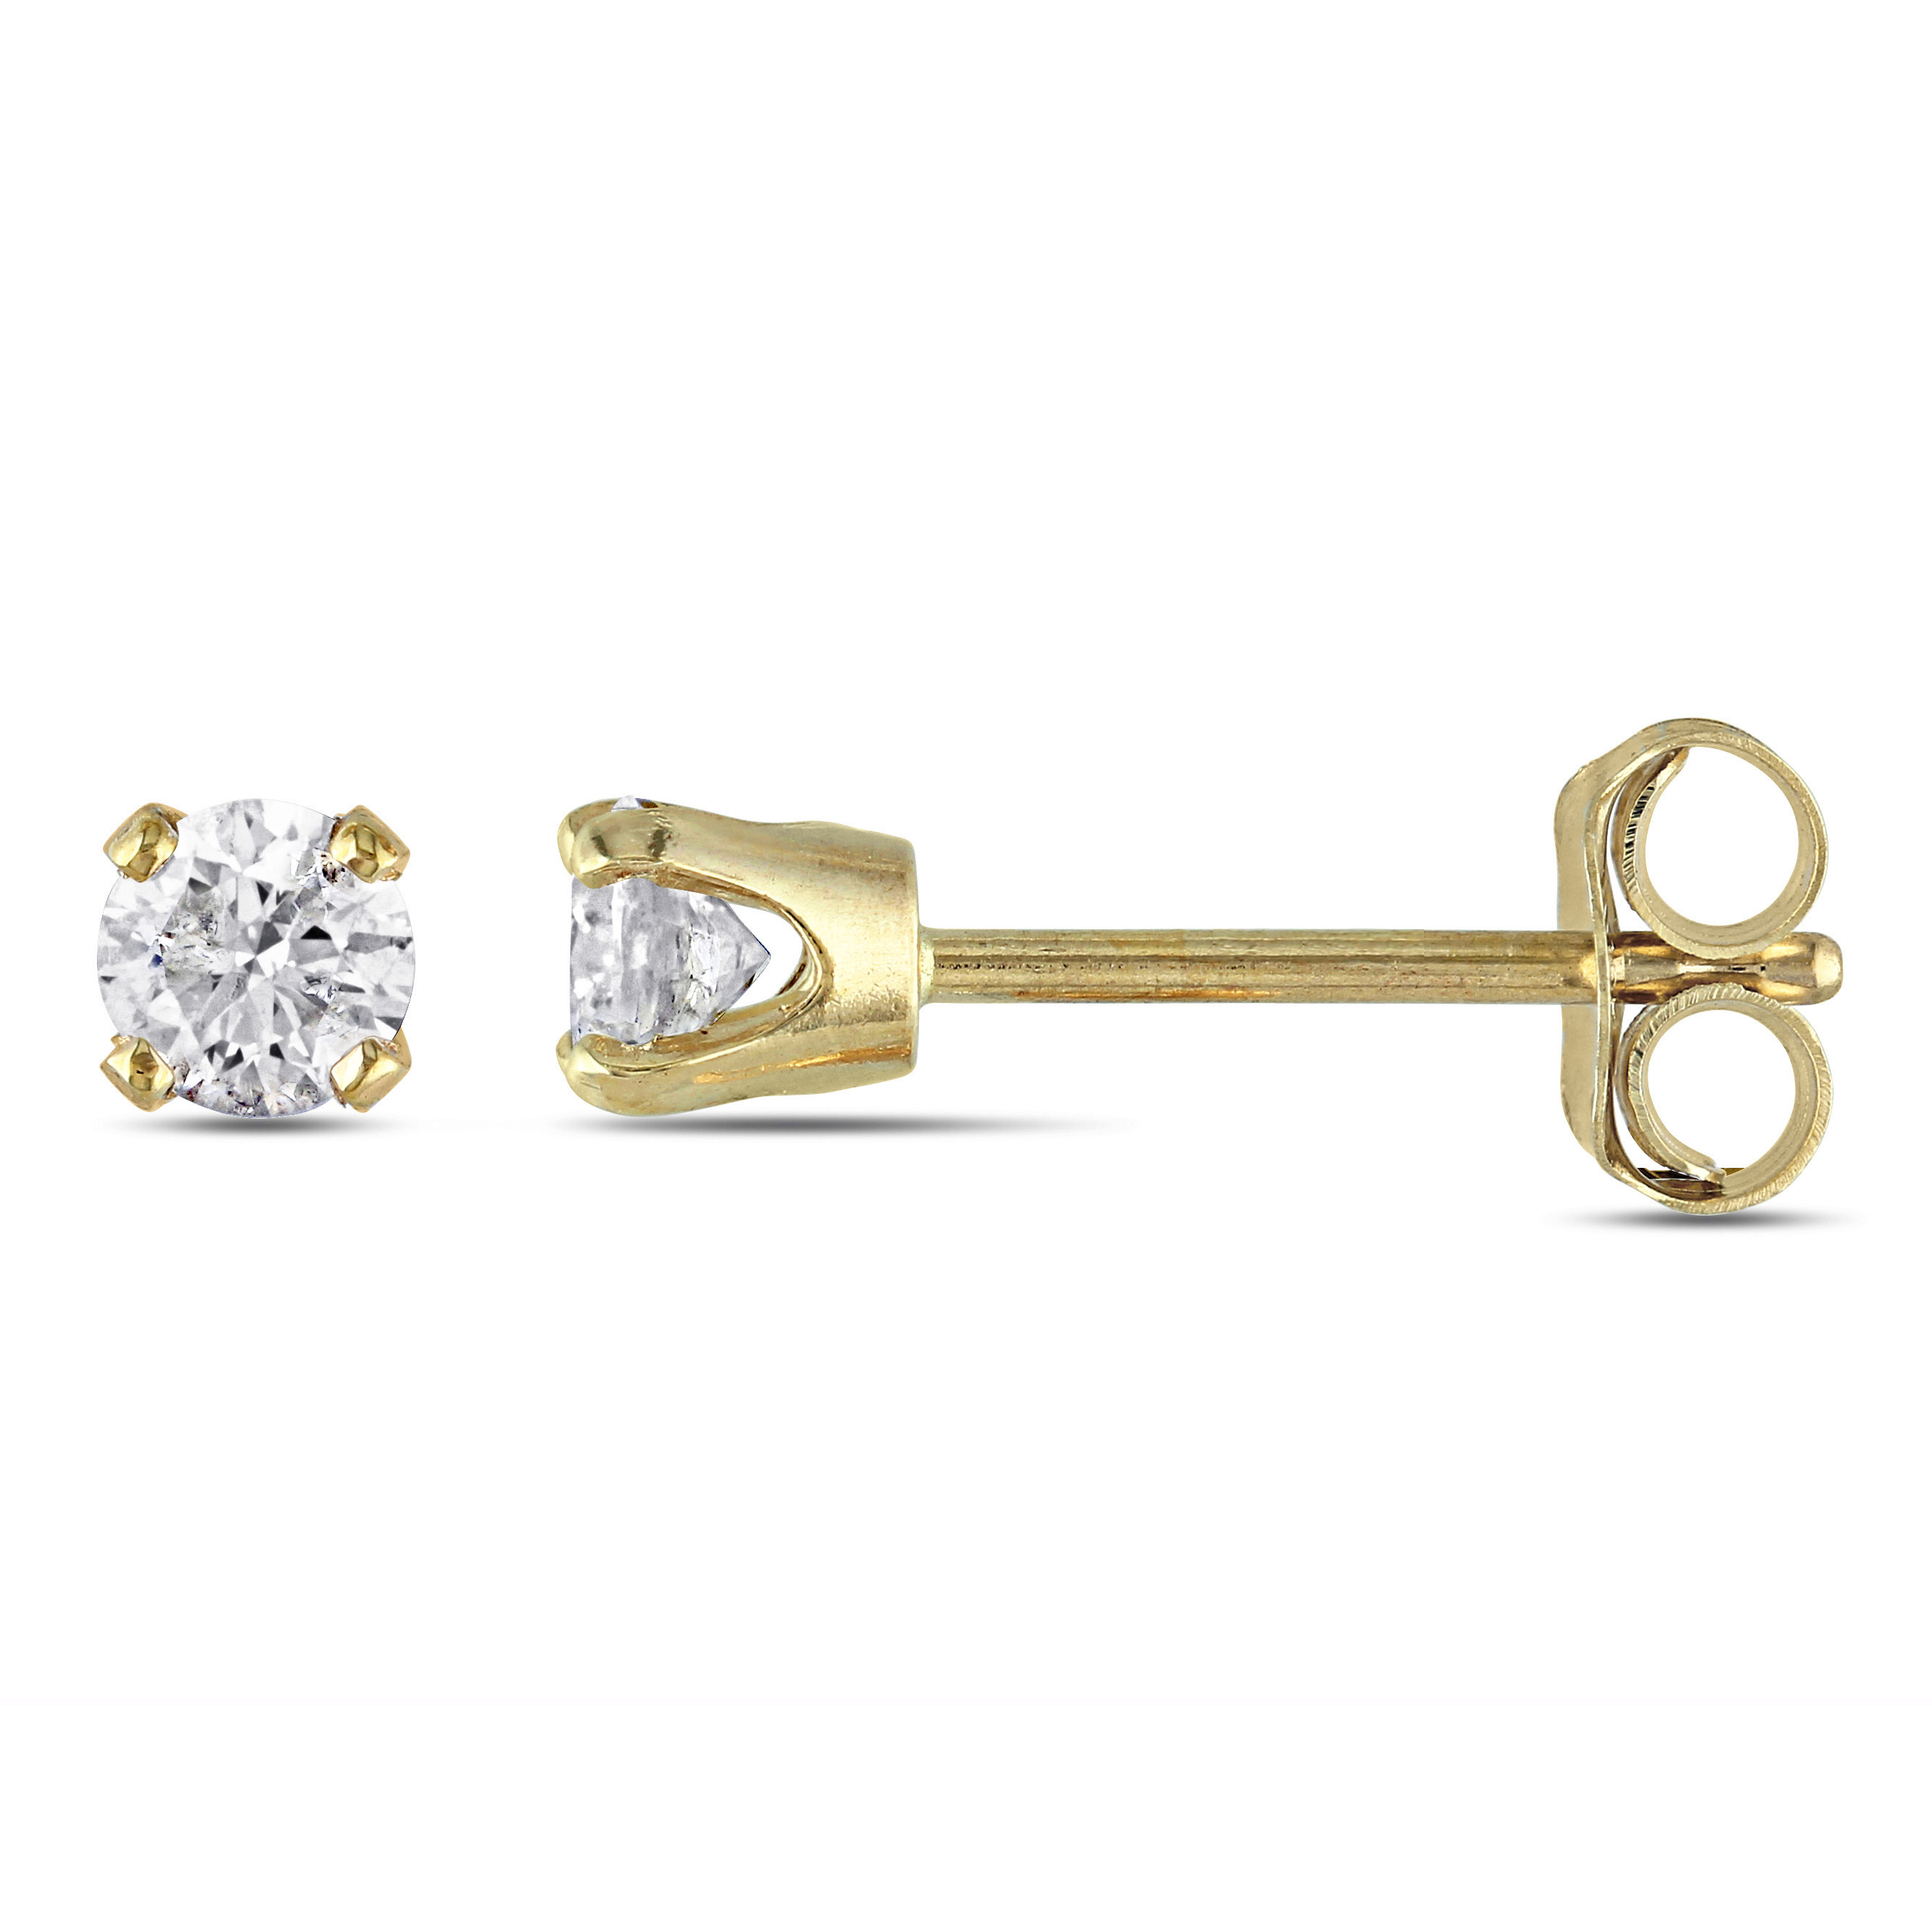 1/4 CT Diamond Solitaire Earrings Set in 10K Yellow Gold (I3)